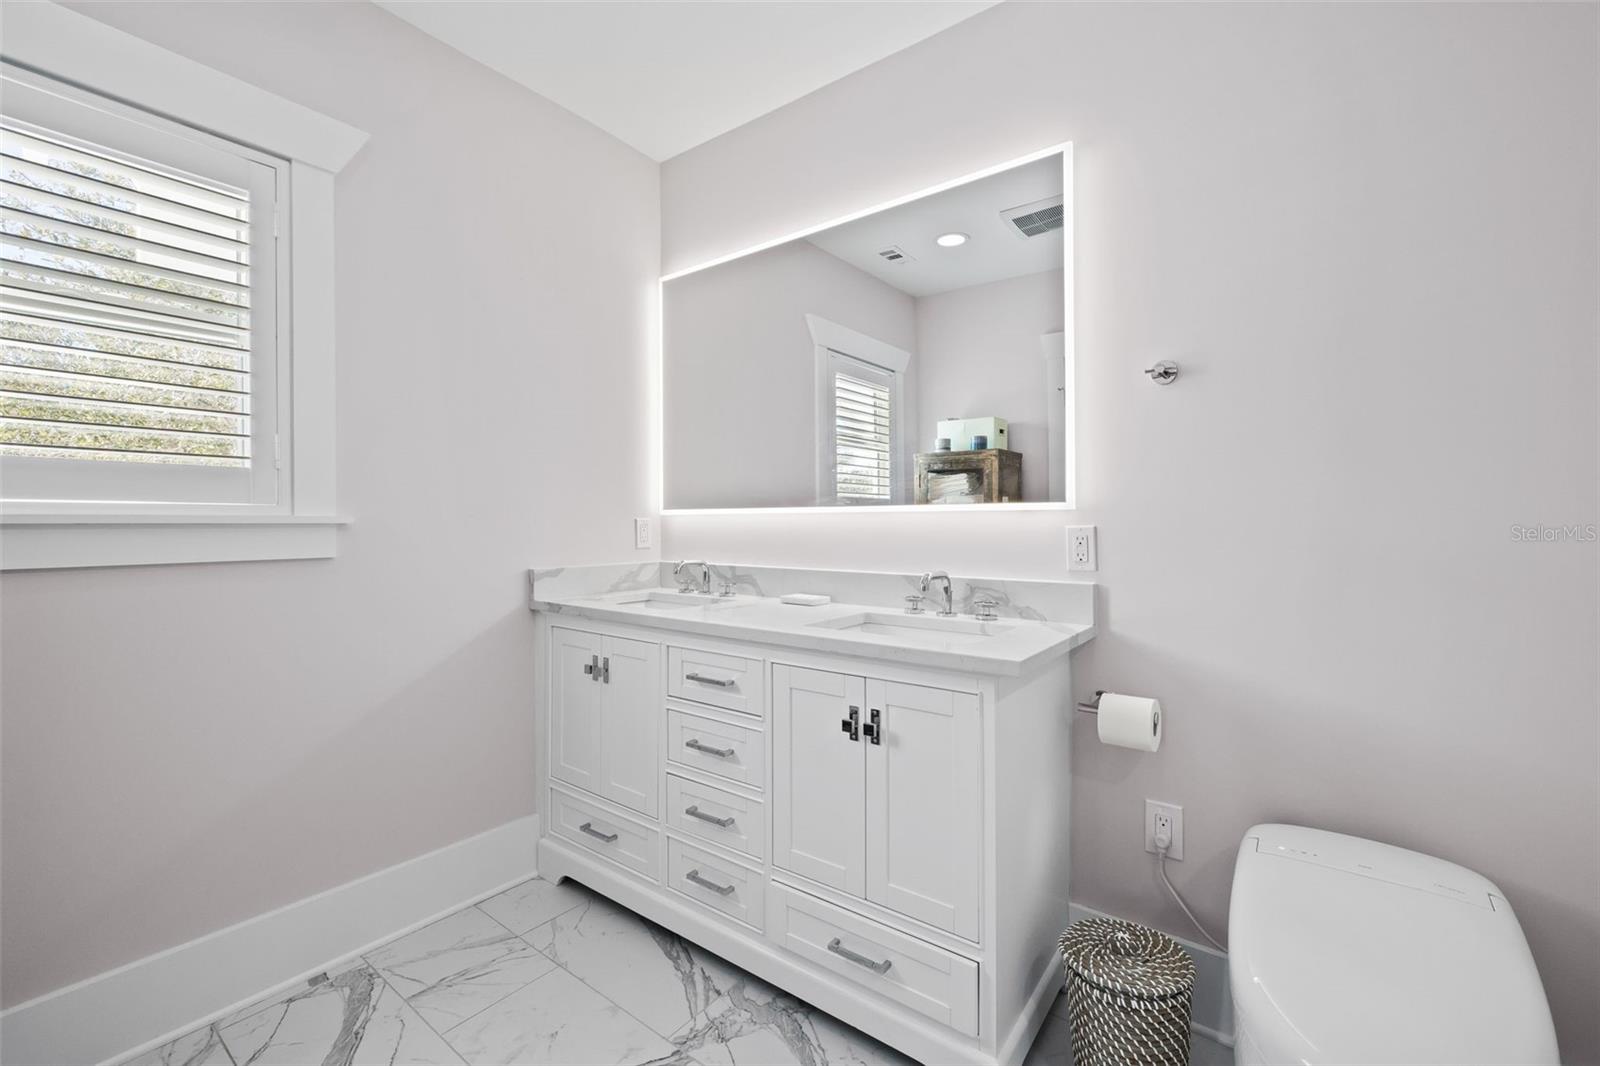 Lighted mirror and dual vanity